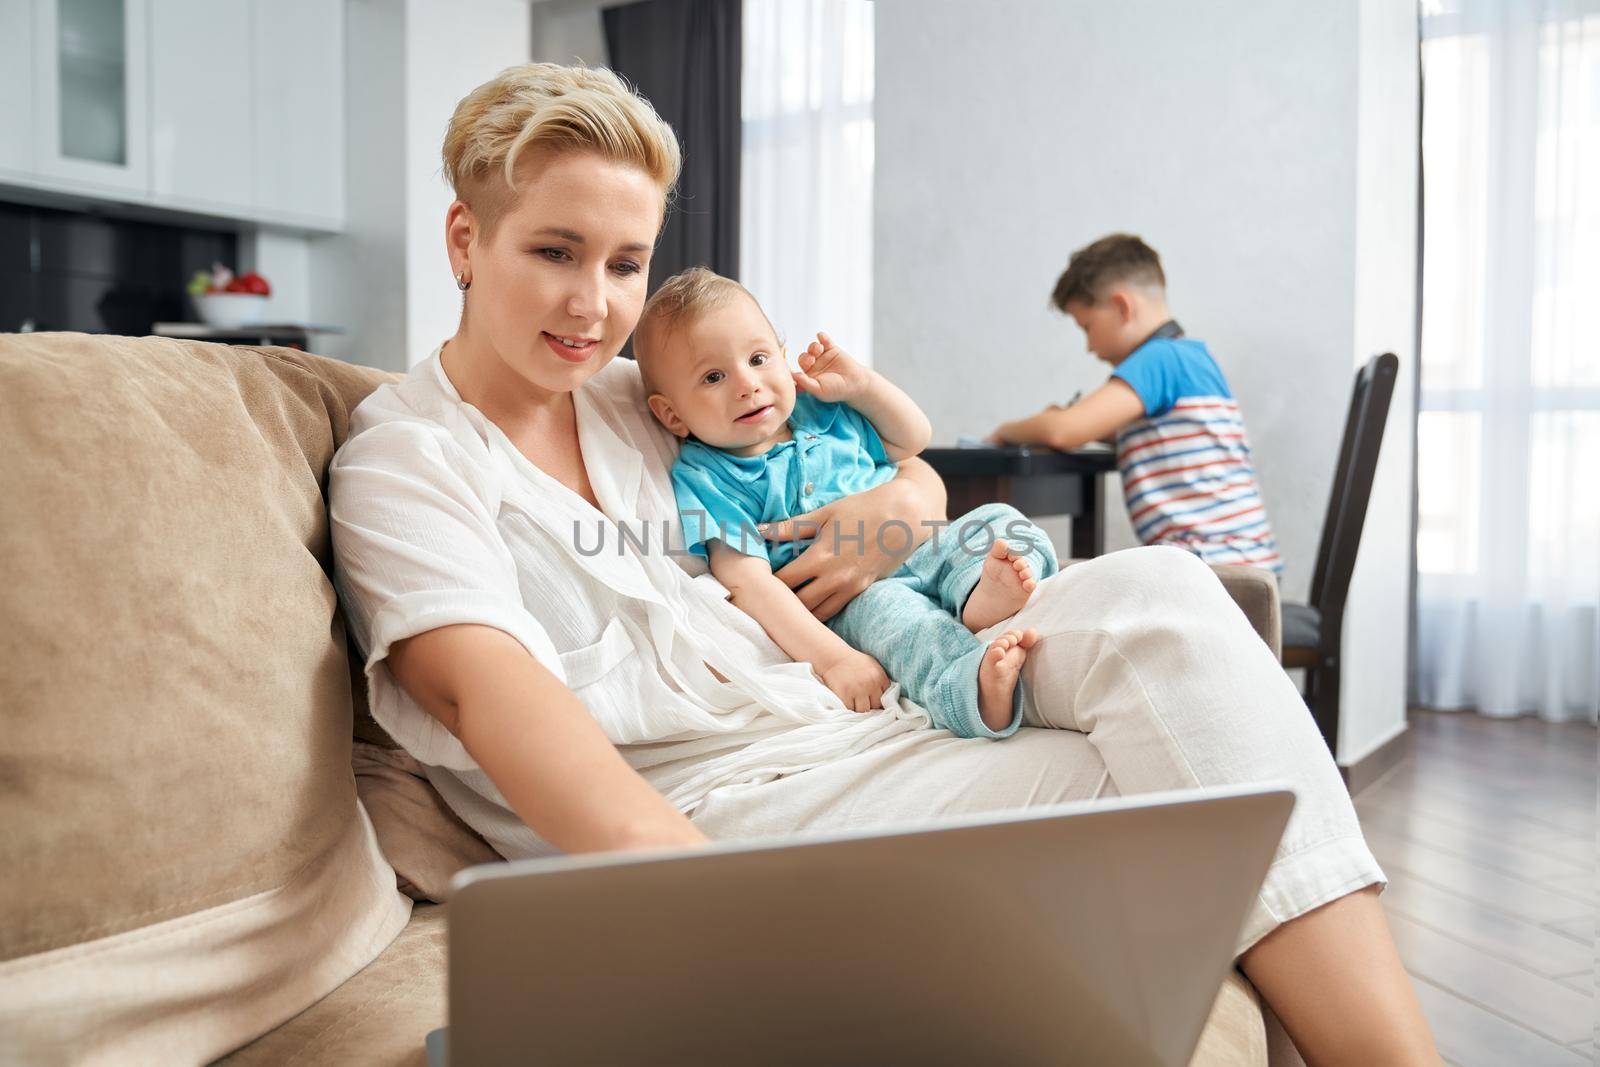 Pleasant woman with blond hair working on laptop and carrying toddler on hands. Blur background of teenage boy sitting on table and doing homework.